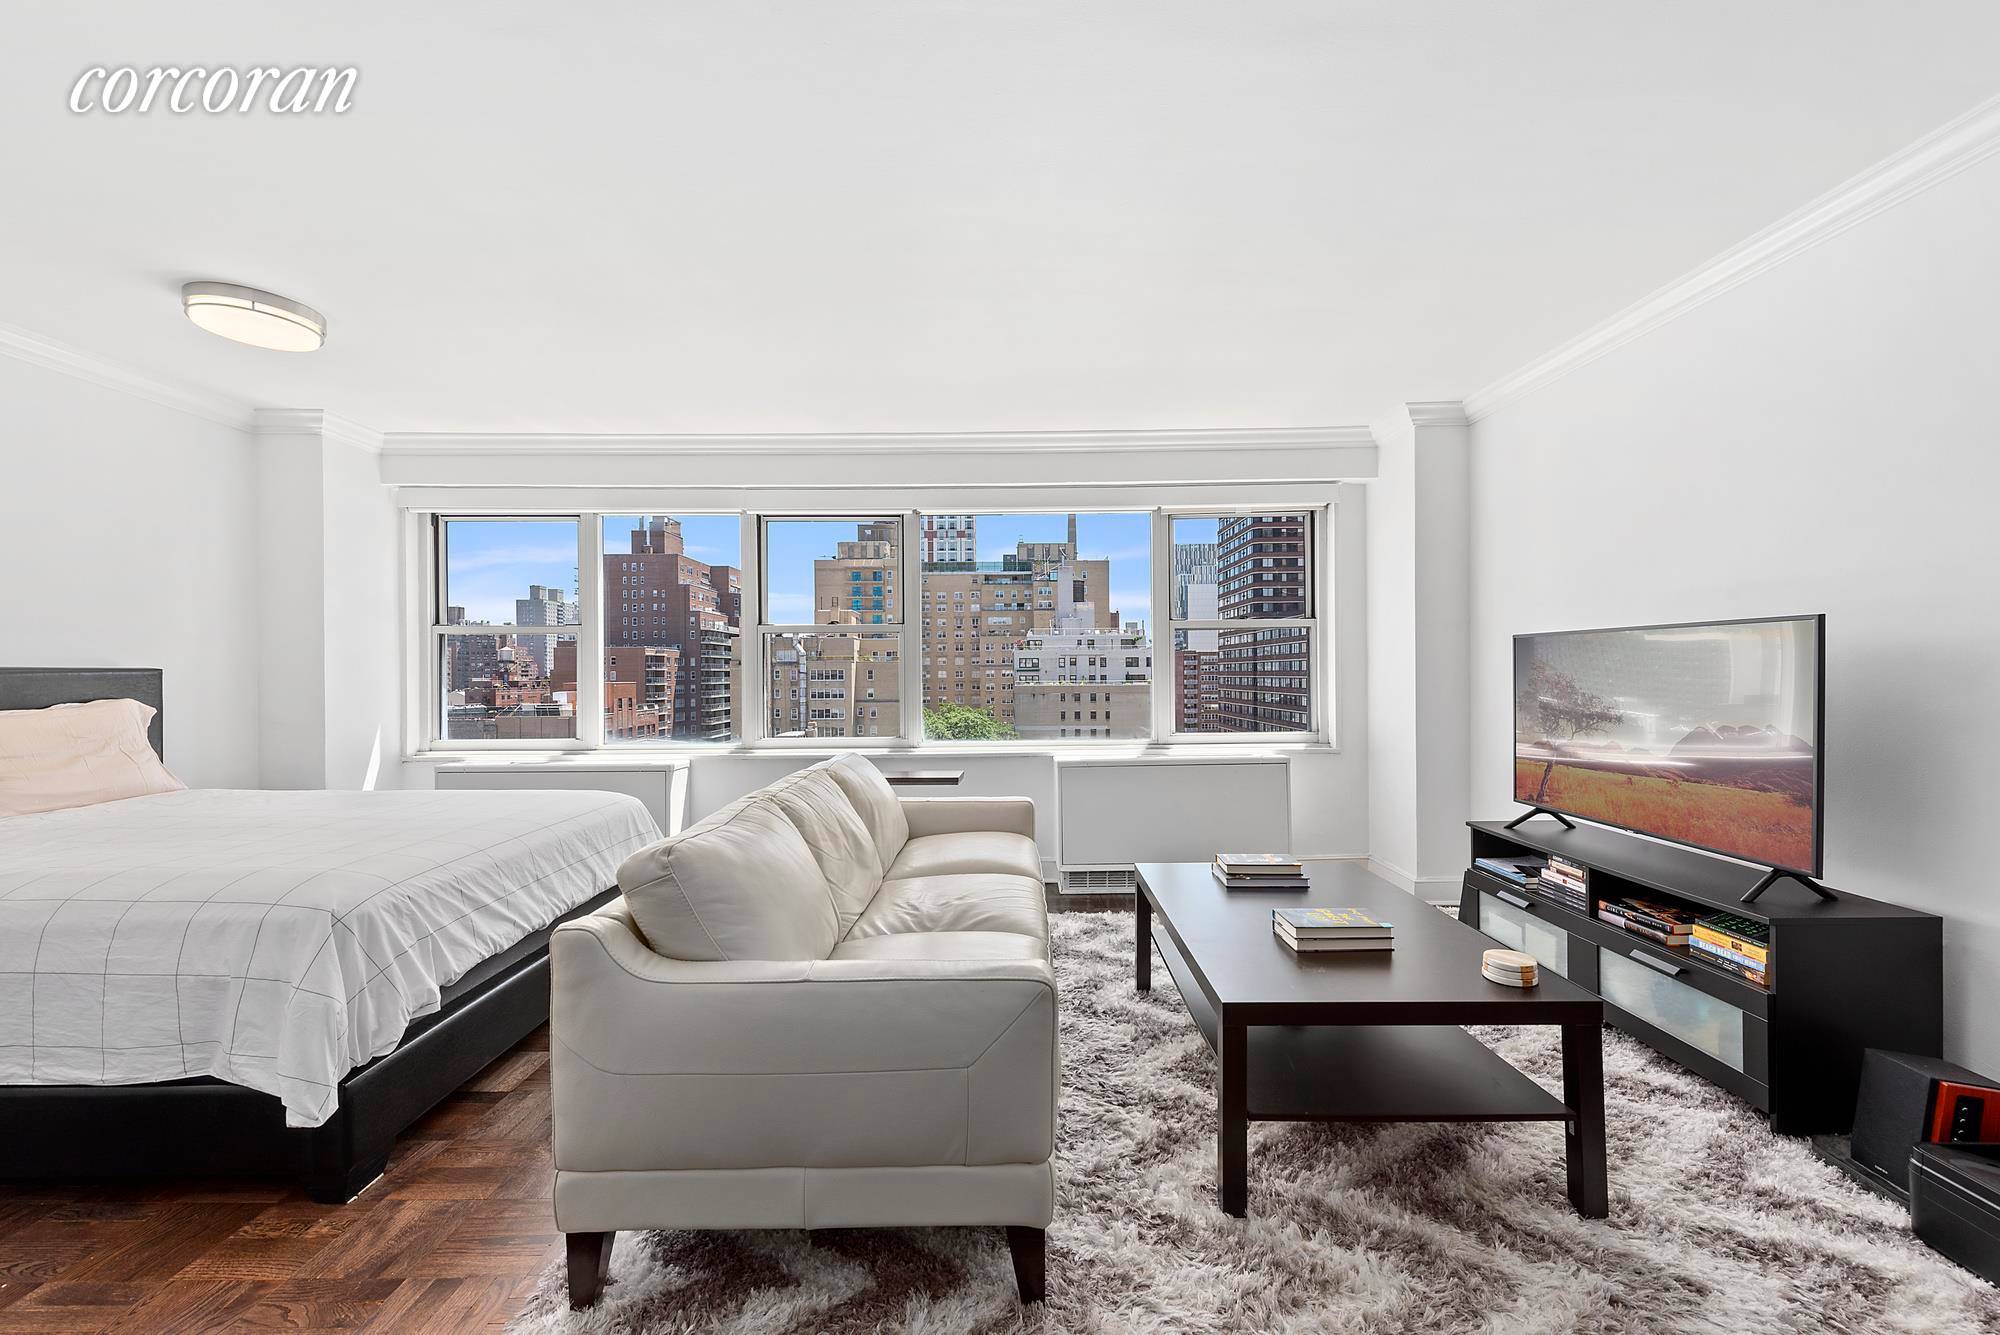 Enjoy beautifully updated interiors, glorious natural light and a spacious convertible one bedroom layout at The Wilshire, a full service Lenox Hill cooperative featuring incredibly low monthly maintenance.